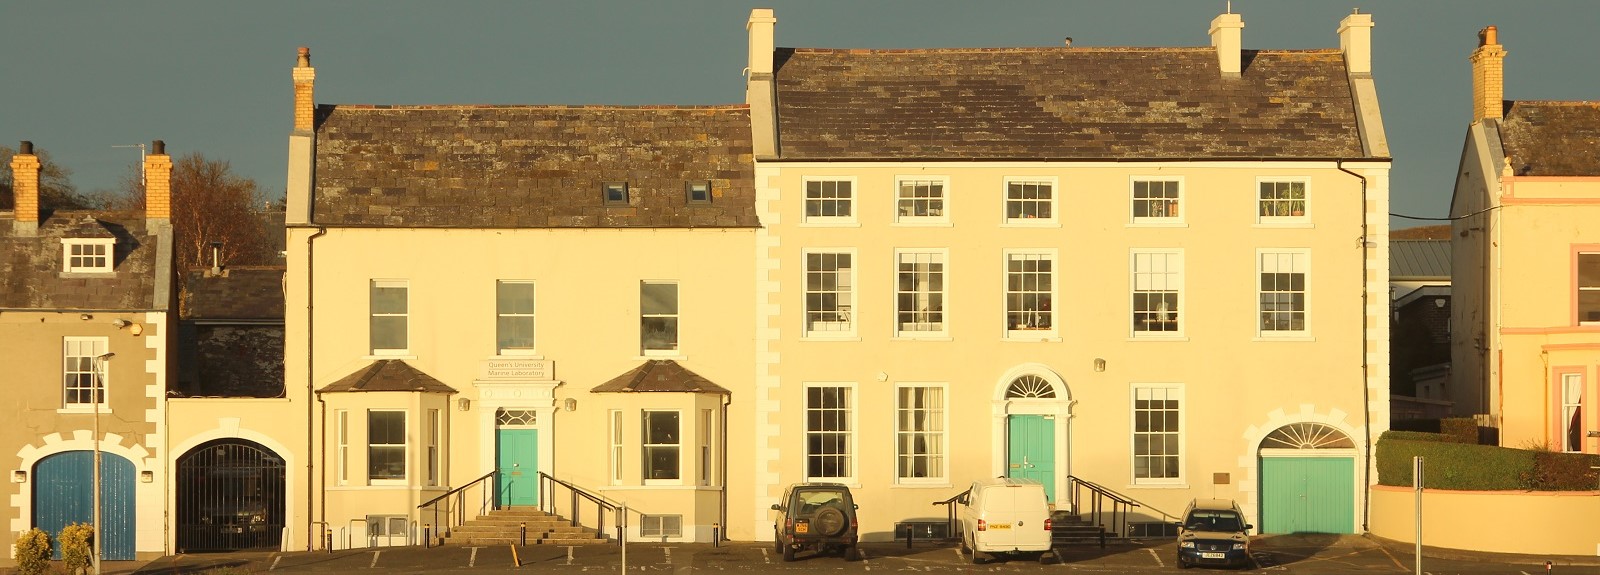 The front of the Marine Biology building in Portaferry